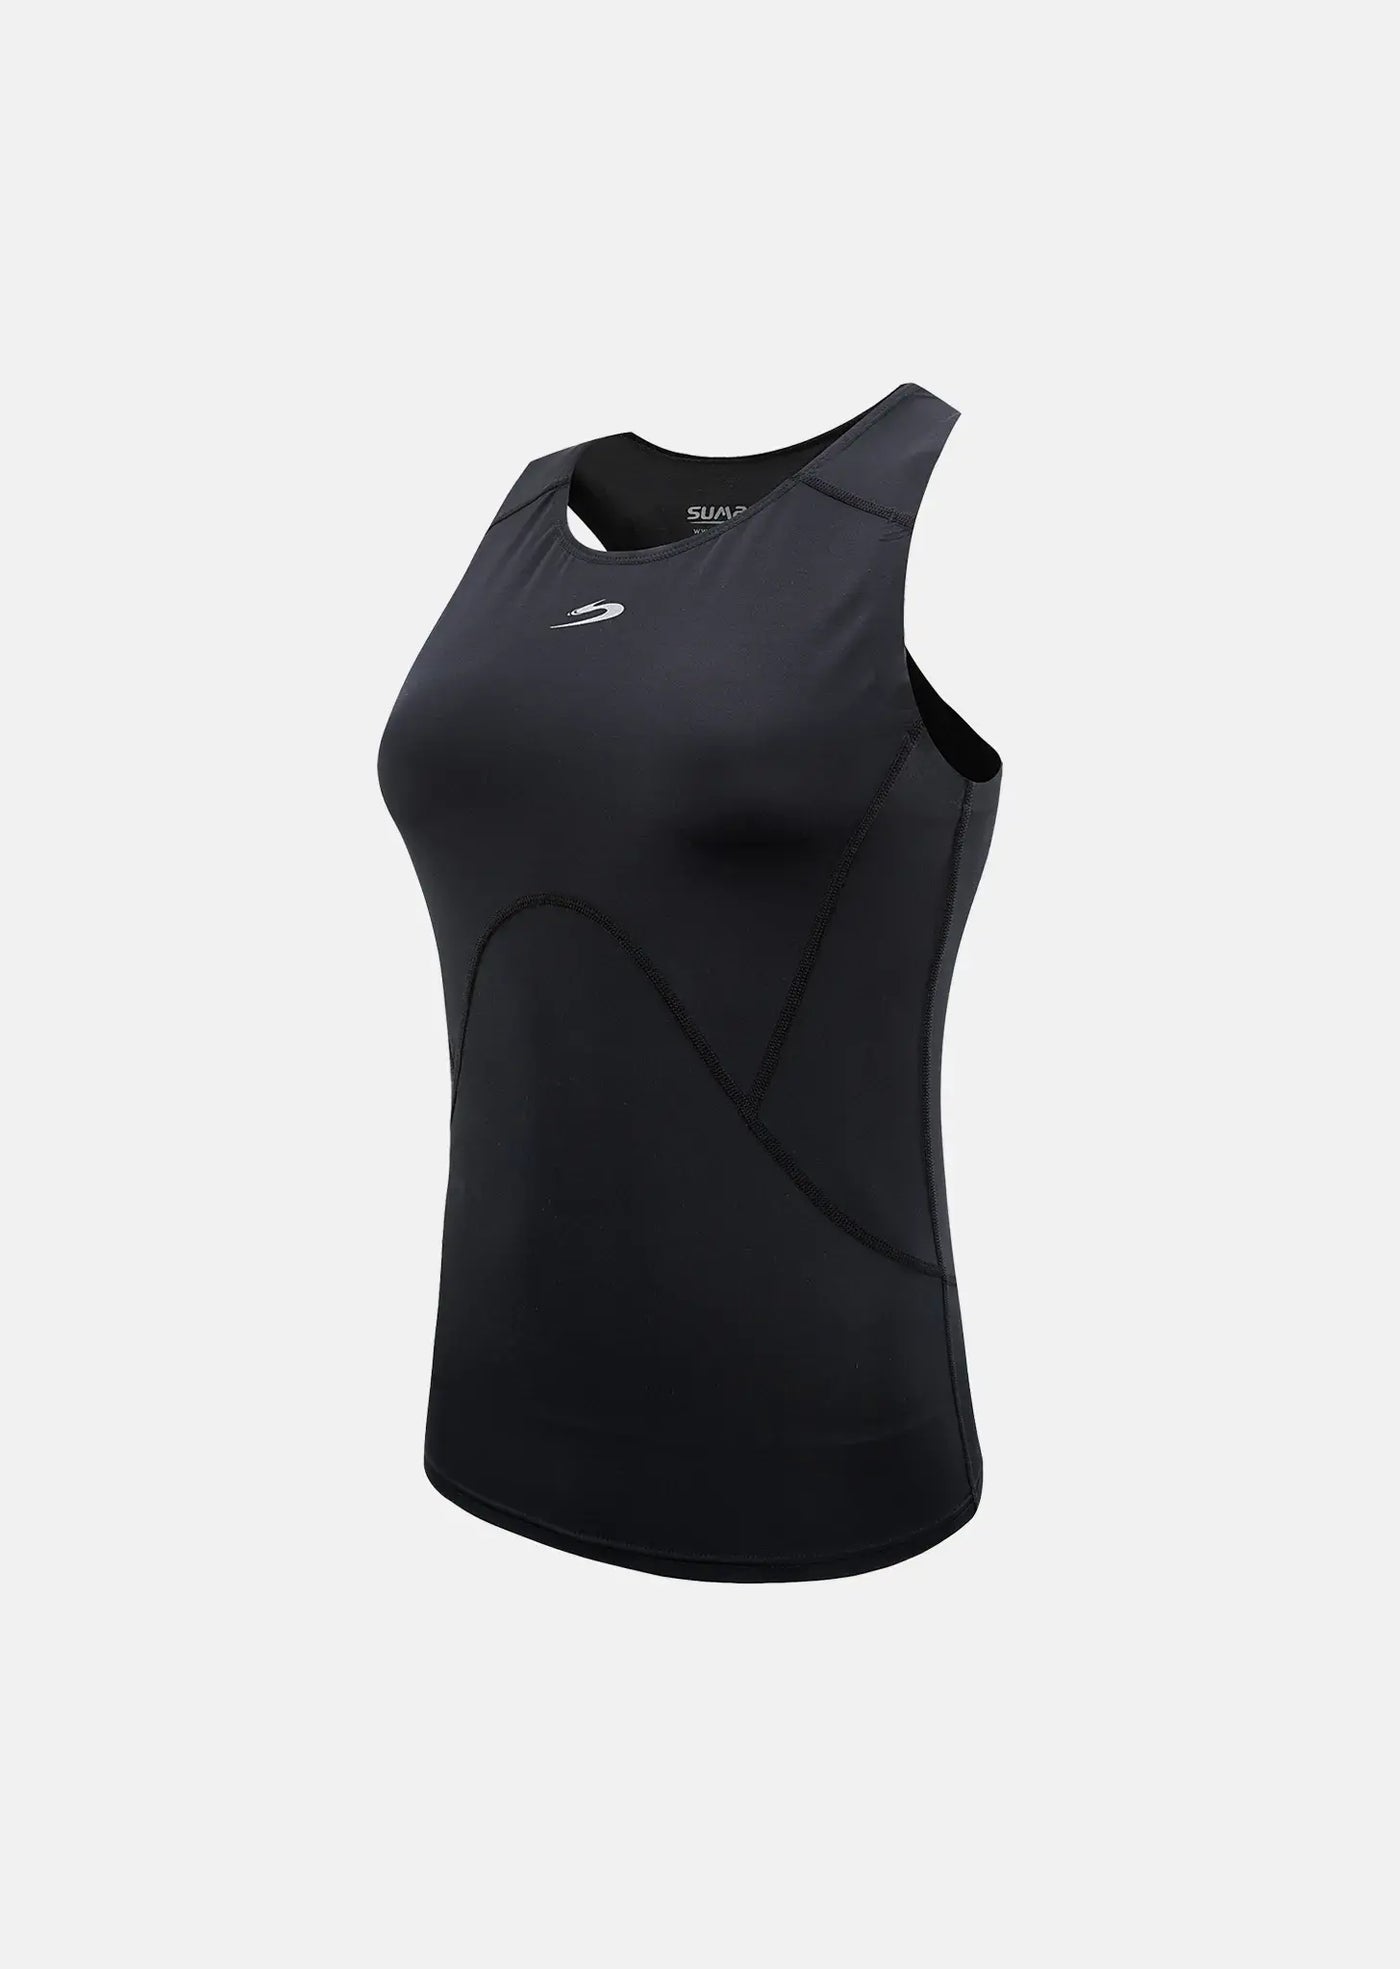 Compression Tank Top for Women - White